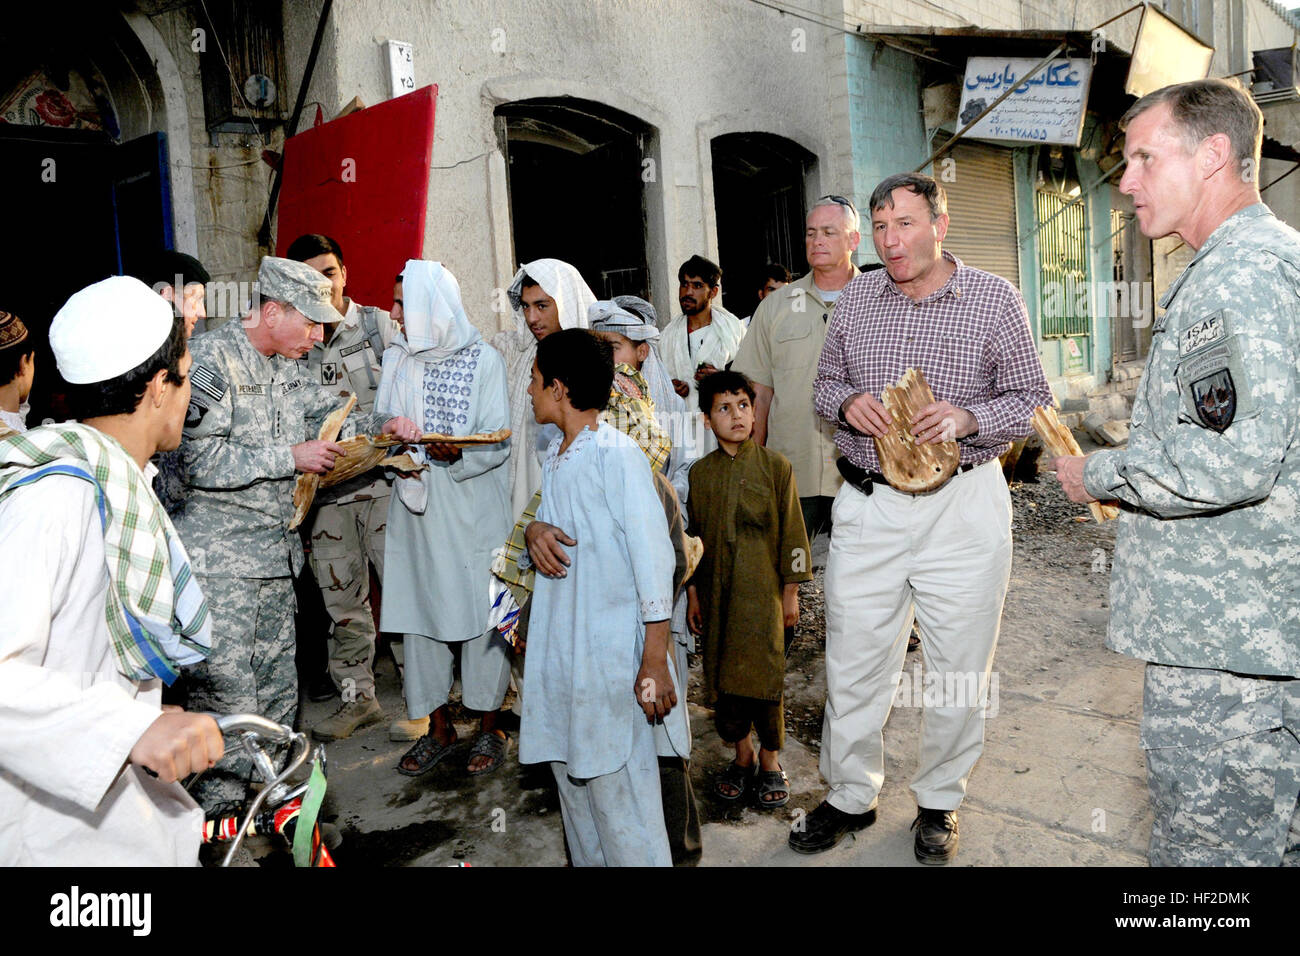 Gen. David H. Petraeus breaks bread with a group of boys outside a bakery in a Kandahar City market  while walking the area Friday (April 30, 2010) with Gen. Stanley McCrystal, International Security Assistance Force commander,  Maj. Gen. Nick Carter, commander of Regional Command - South, (not pictured) and U.S. Ambassador to Afghanistan Karl Eikenberry. (Photo by U.S. Army Staff Sgt. Lorie Jewell) (Released) Petraeus Visits Kandahar City DVIDS276264 Stock Photo